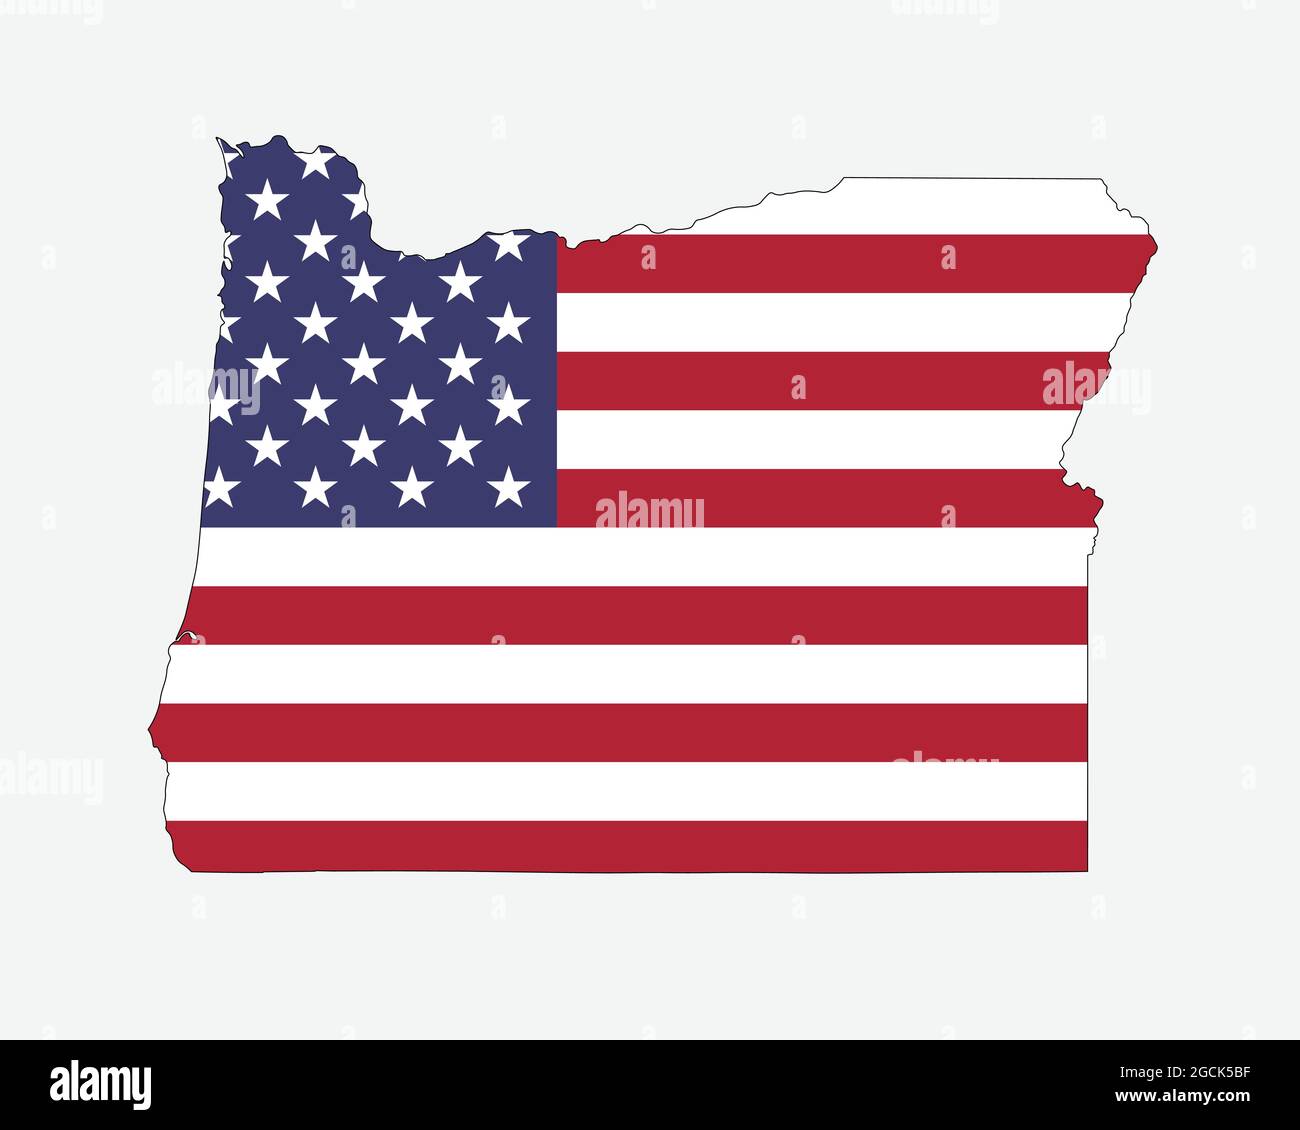 Oregon Map on American Flag. OR, USA State Map on US Flag. EPS Vector Graphic Clipart Icon Stock Vector